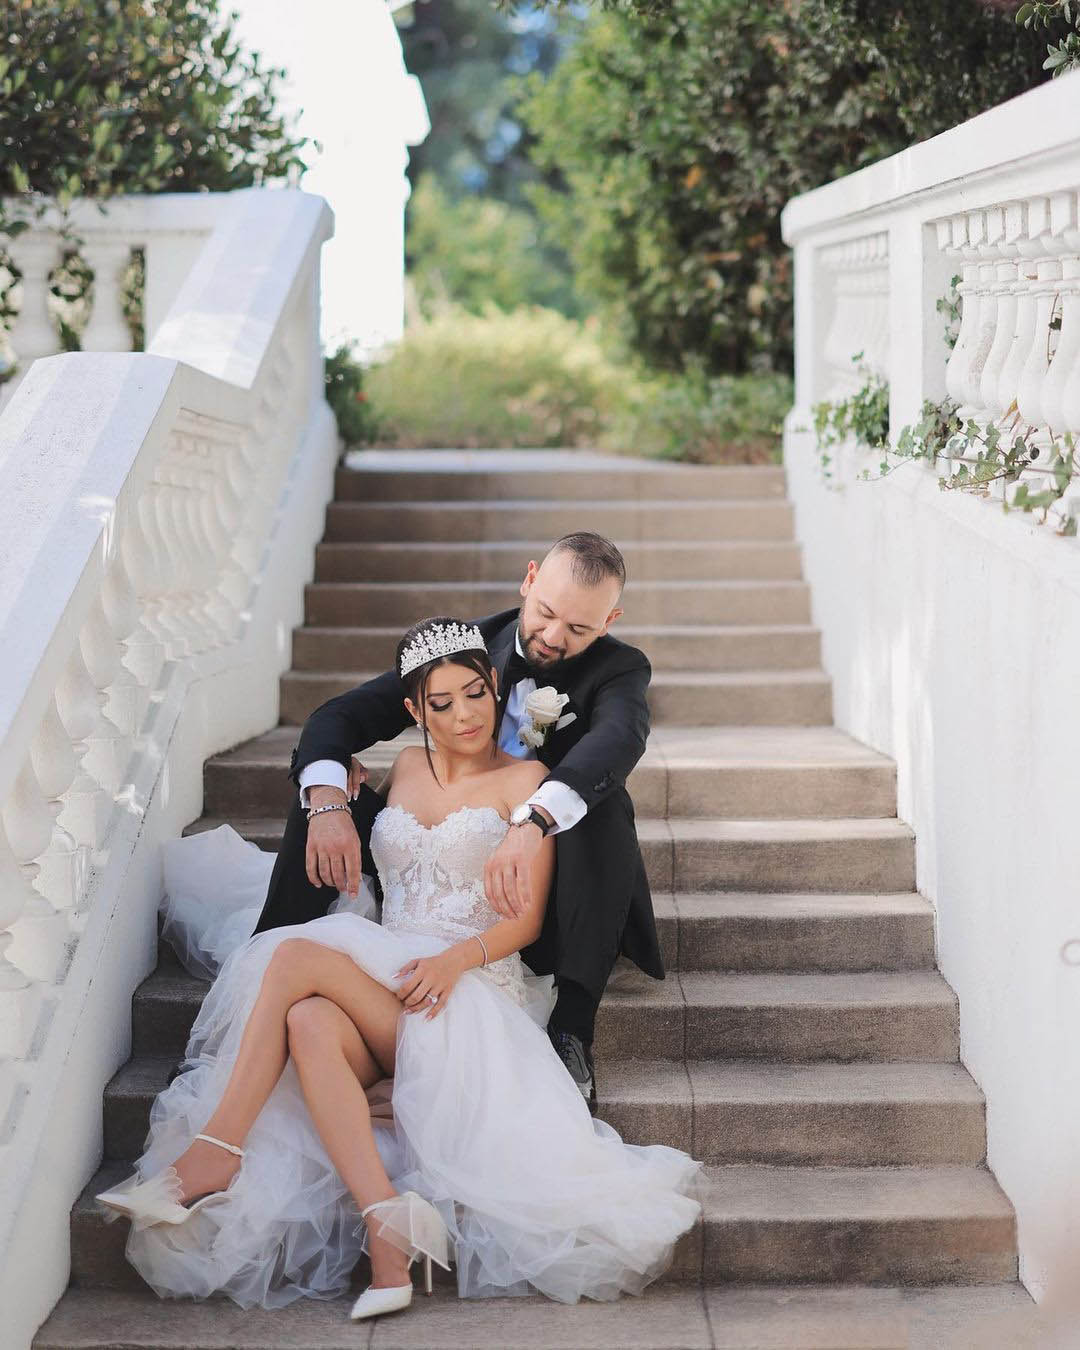 sexy wedding pictures couple on stairs jayjaystudios